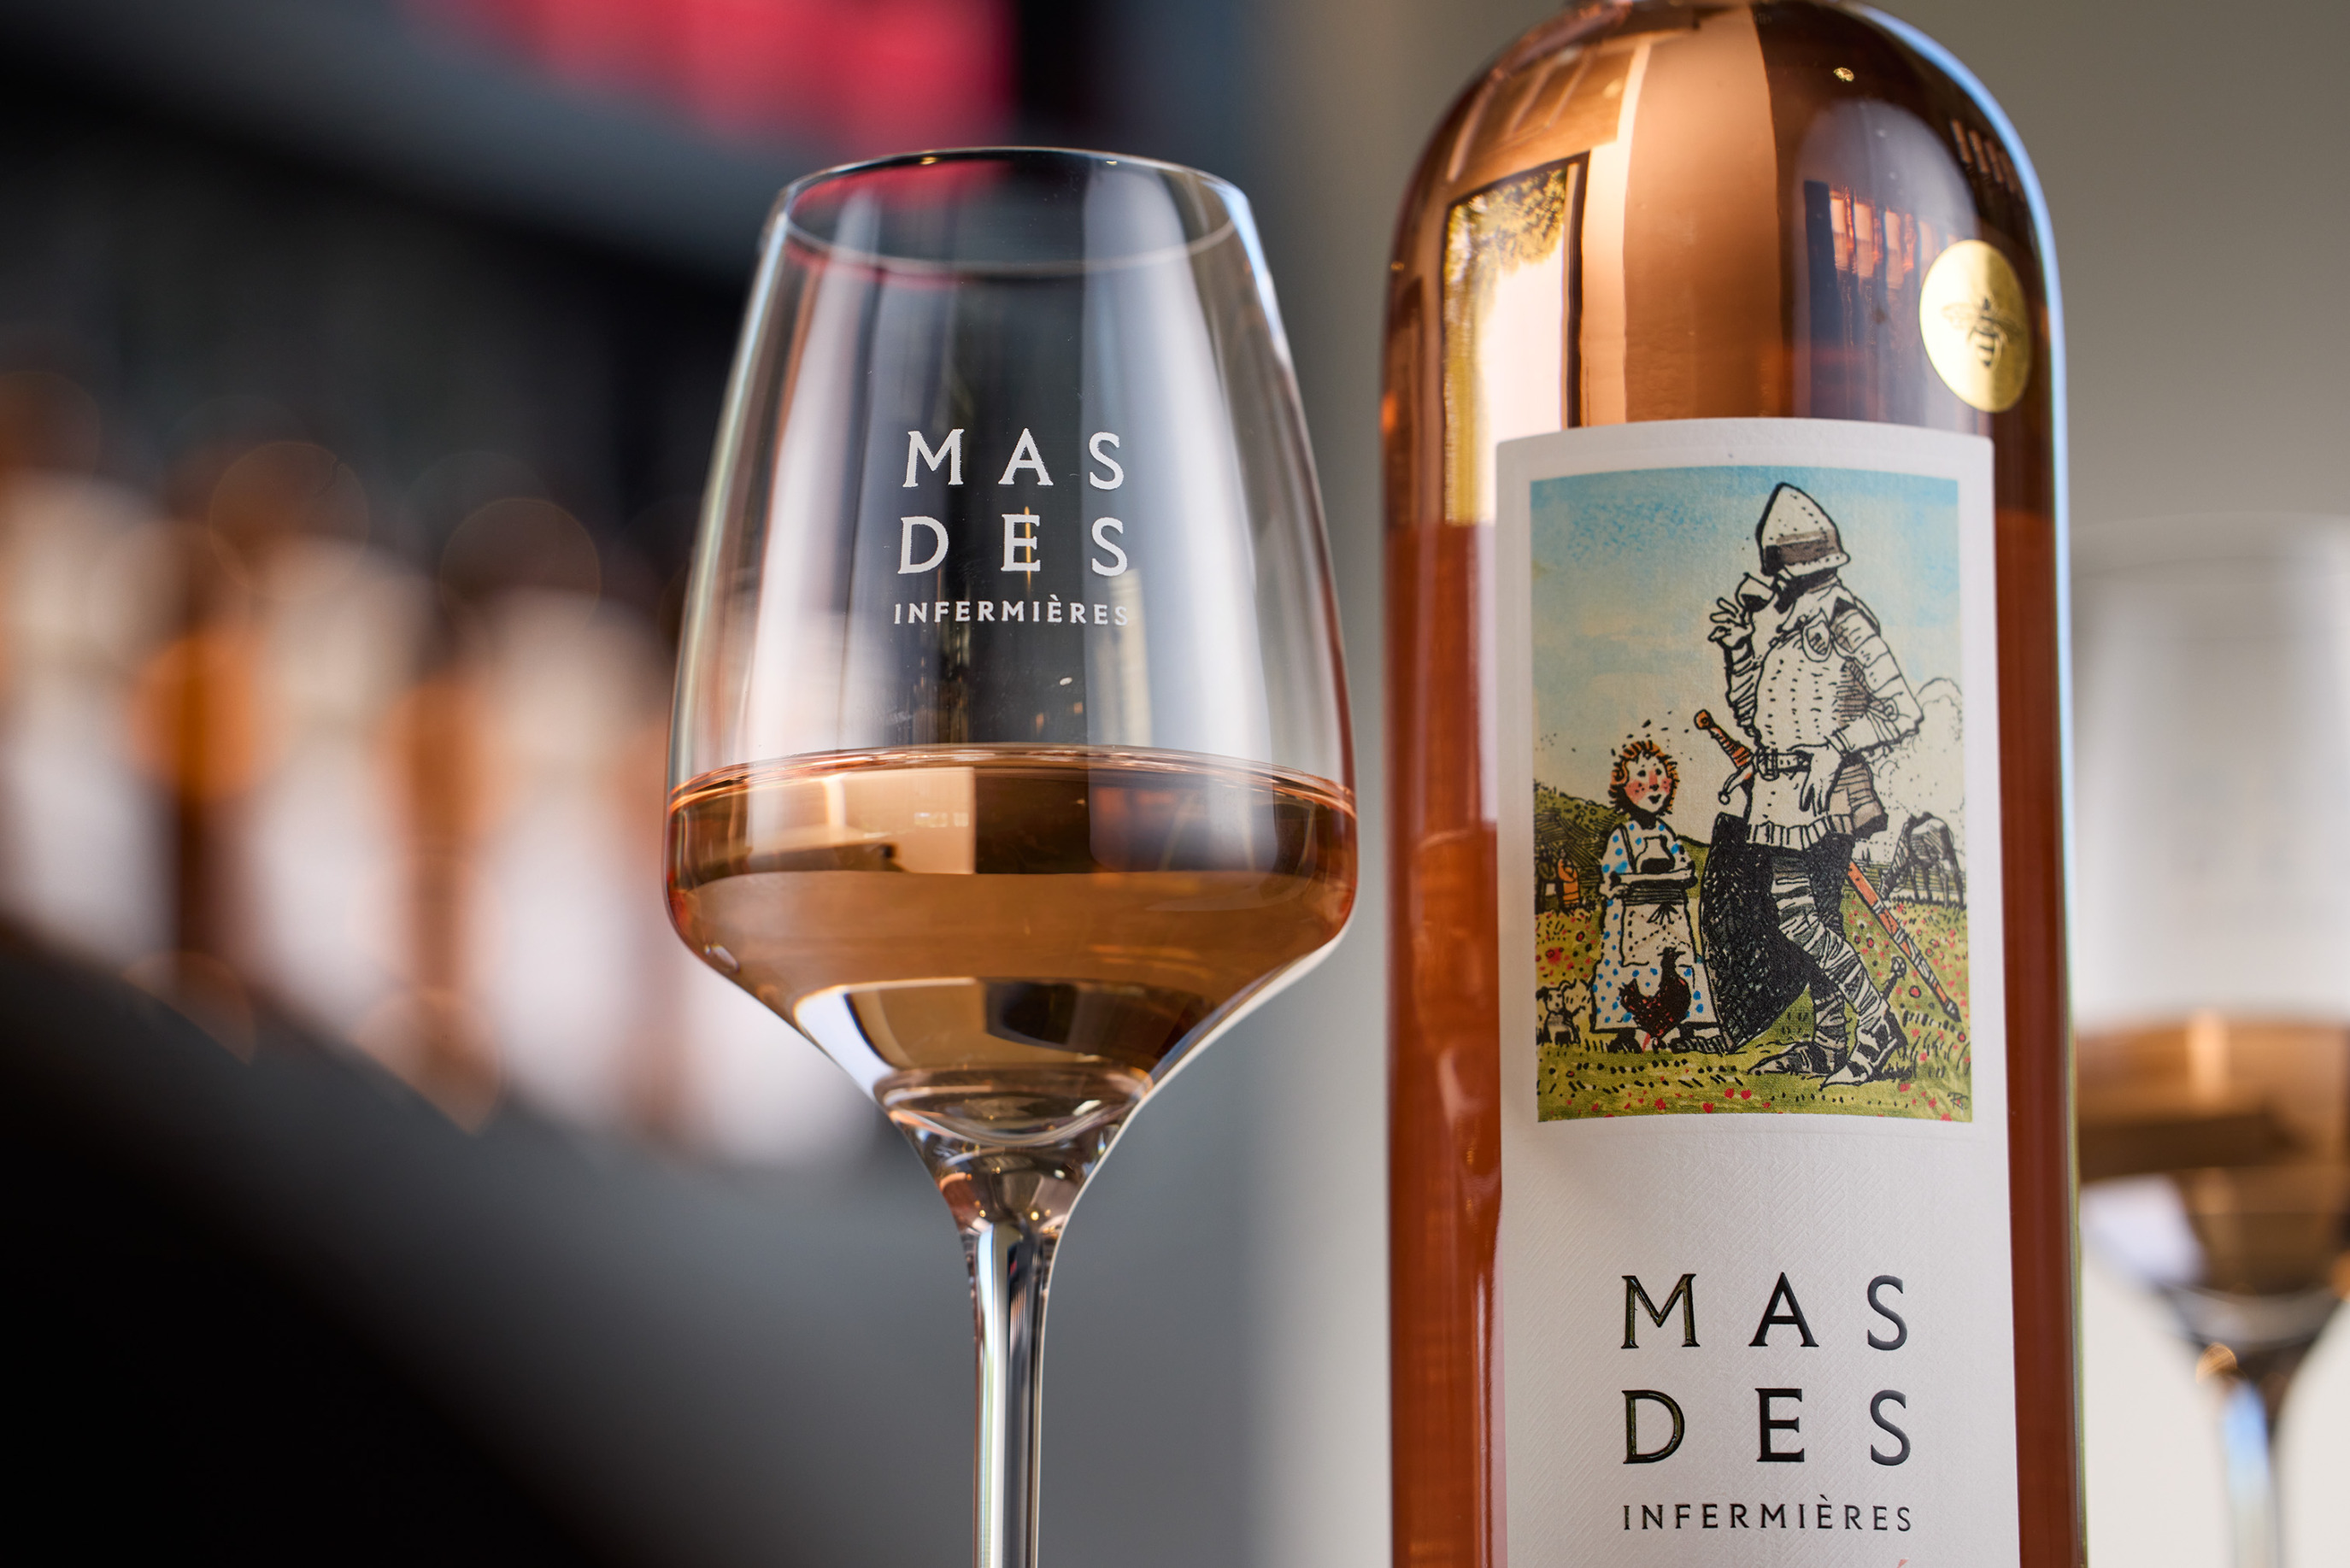 ARCADIA – MAS DES INFERMIERES RIDLEY SCOTT’S PROVENCAL WINERY NOW AVAILABLE IN THE UK